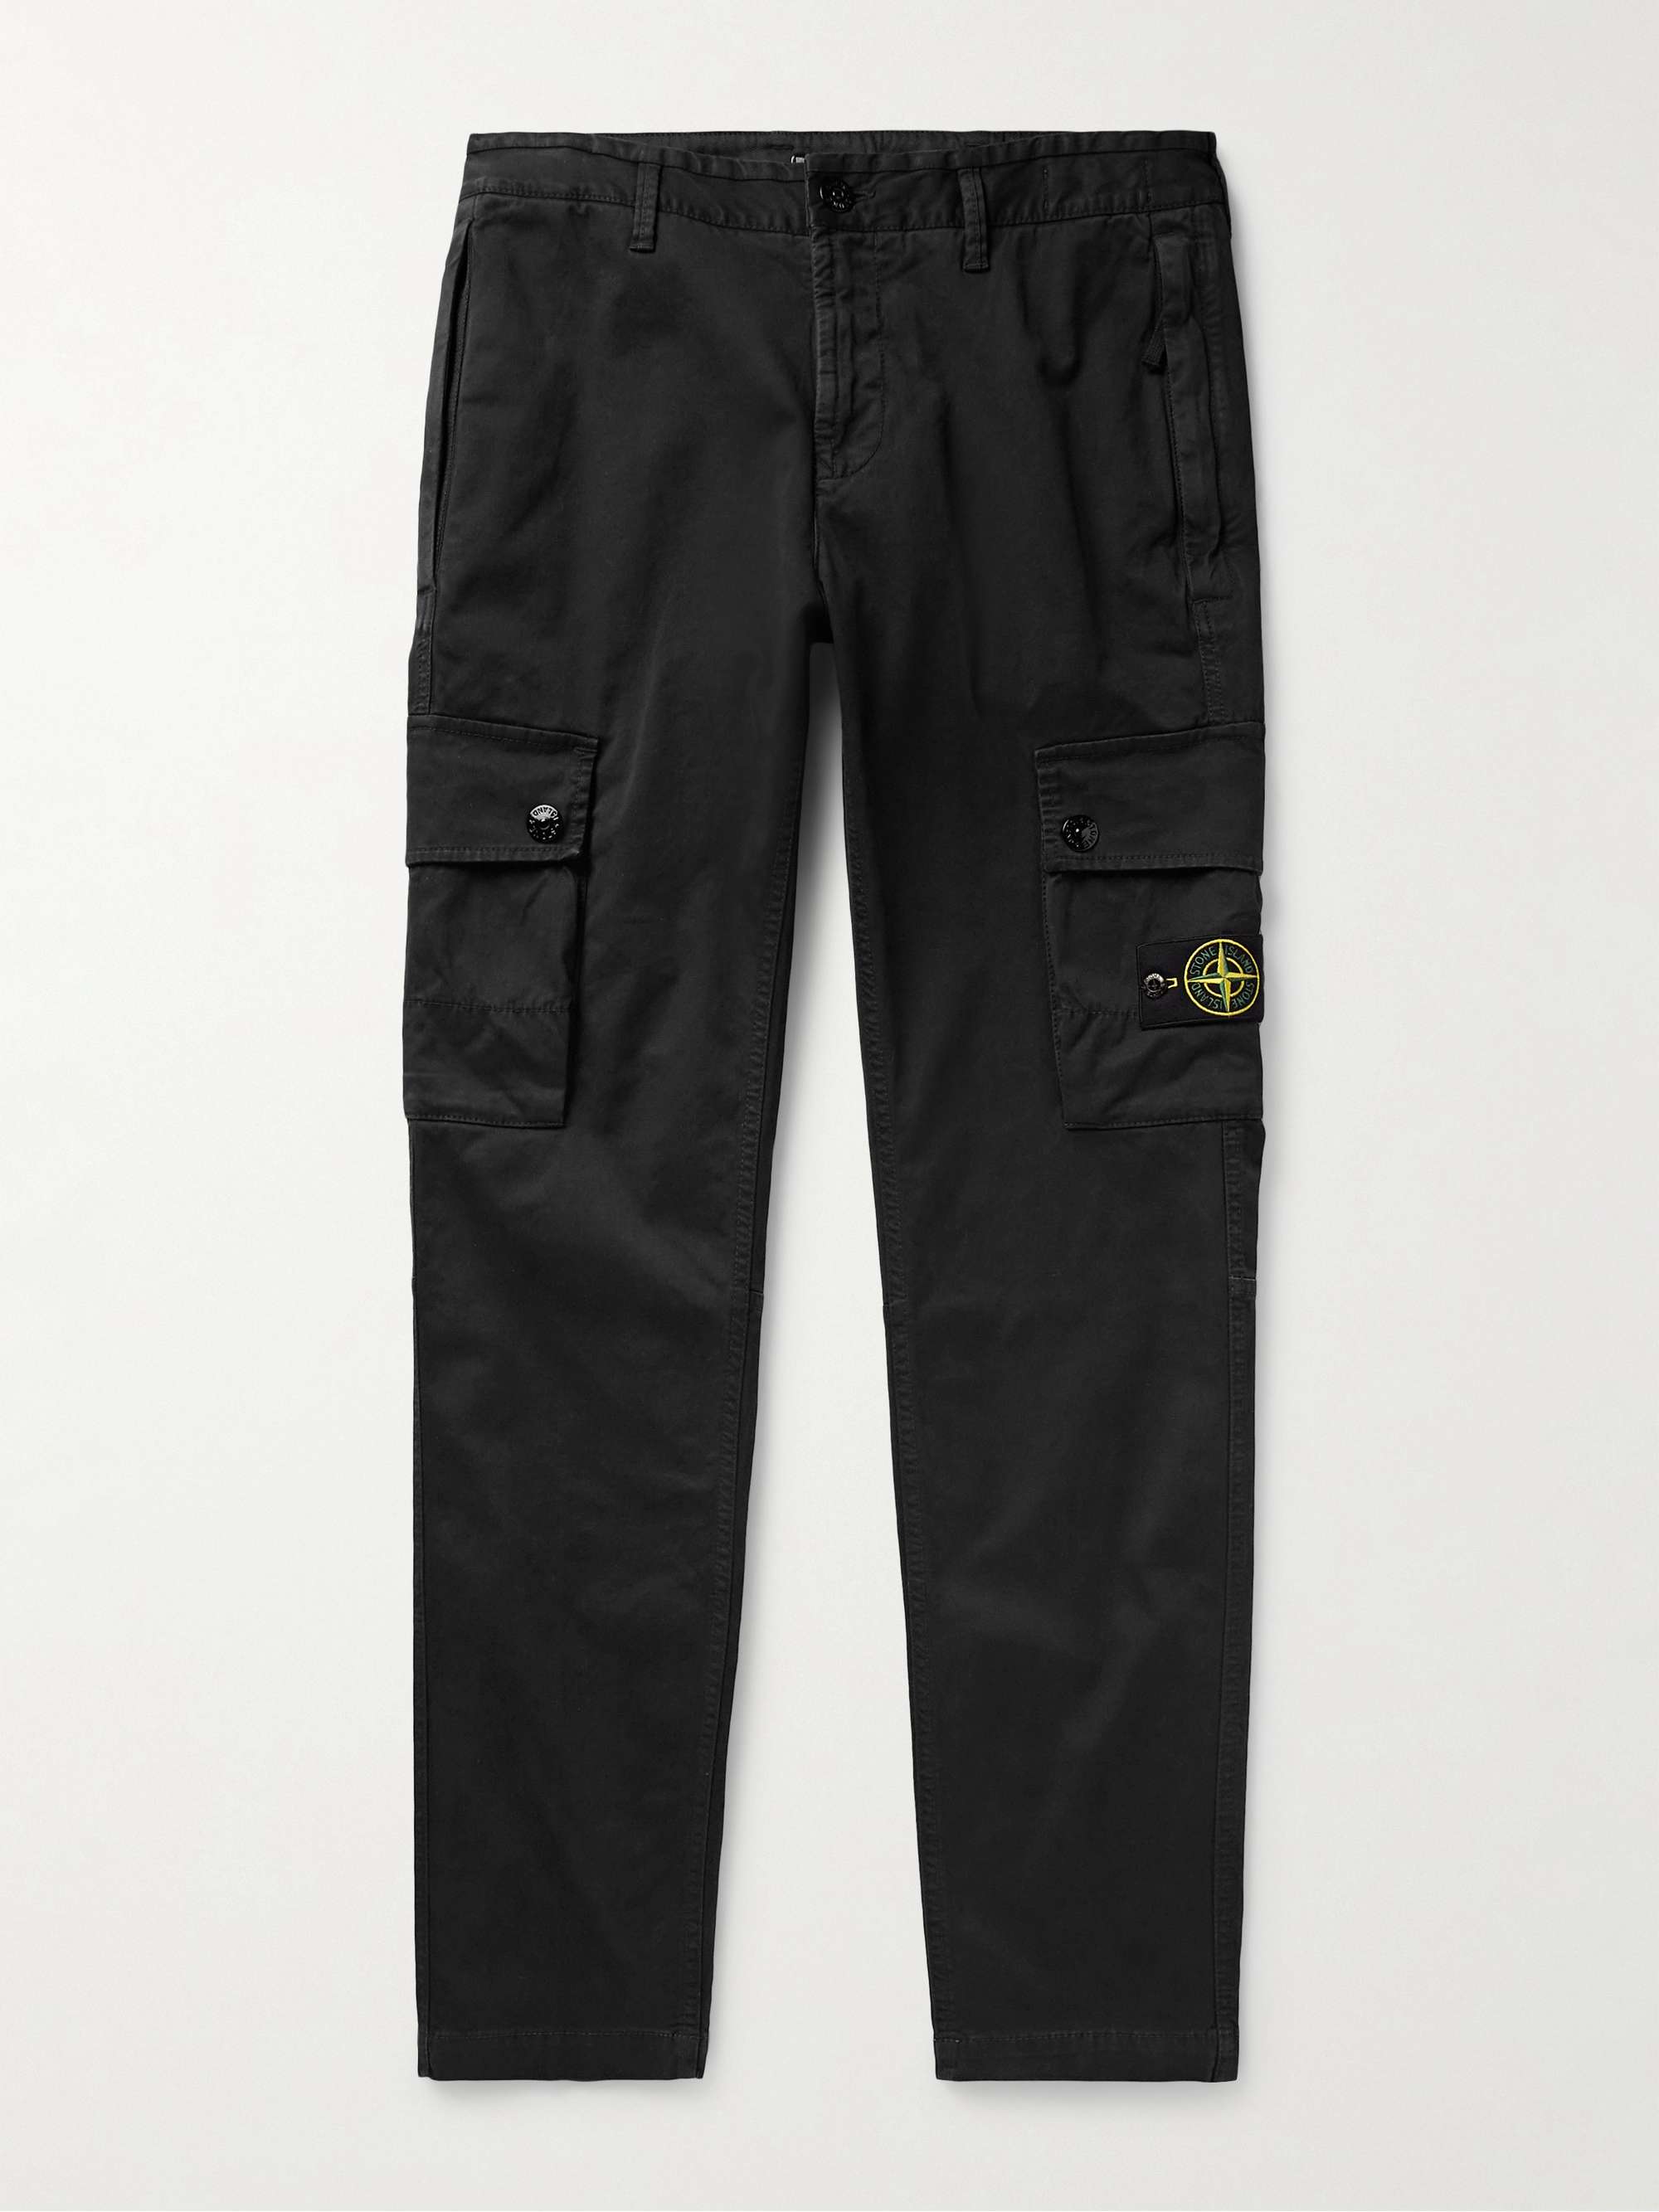 Relaxed Fit Cargo trousers - Dark khaki green - Men | H&M IN